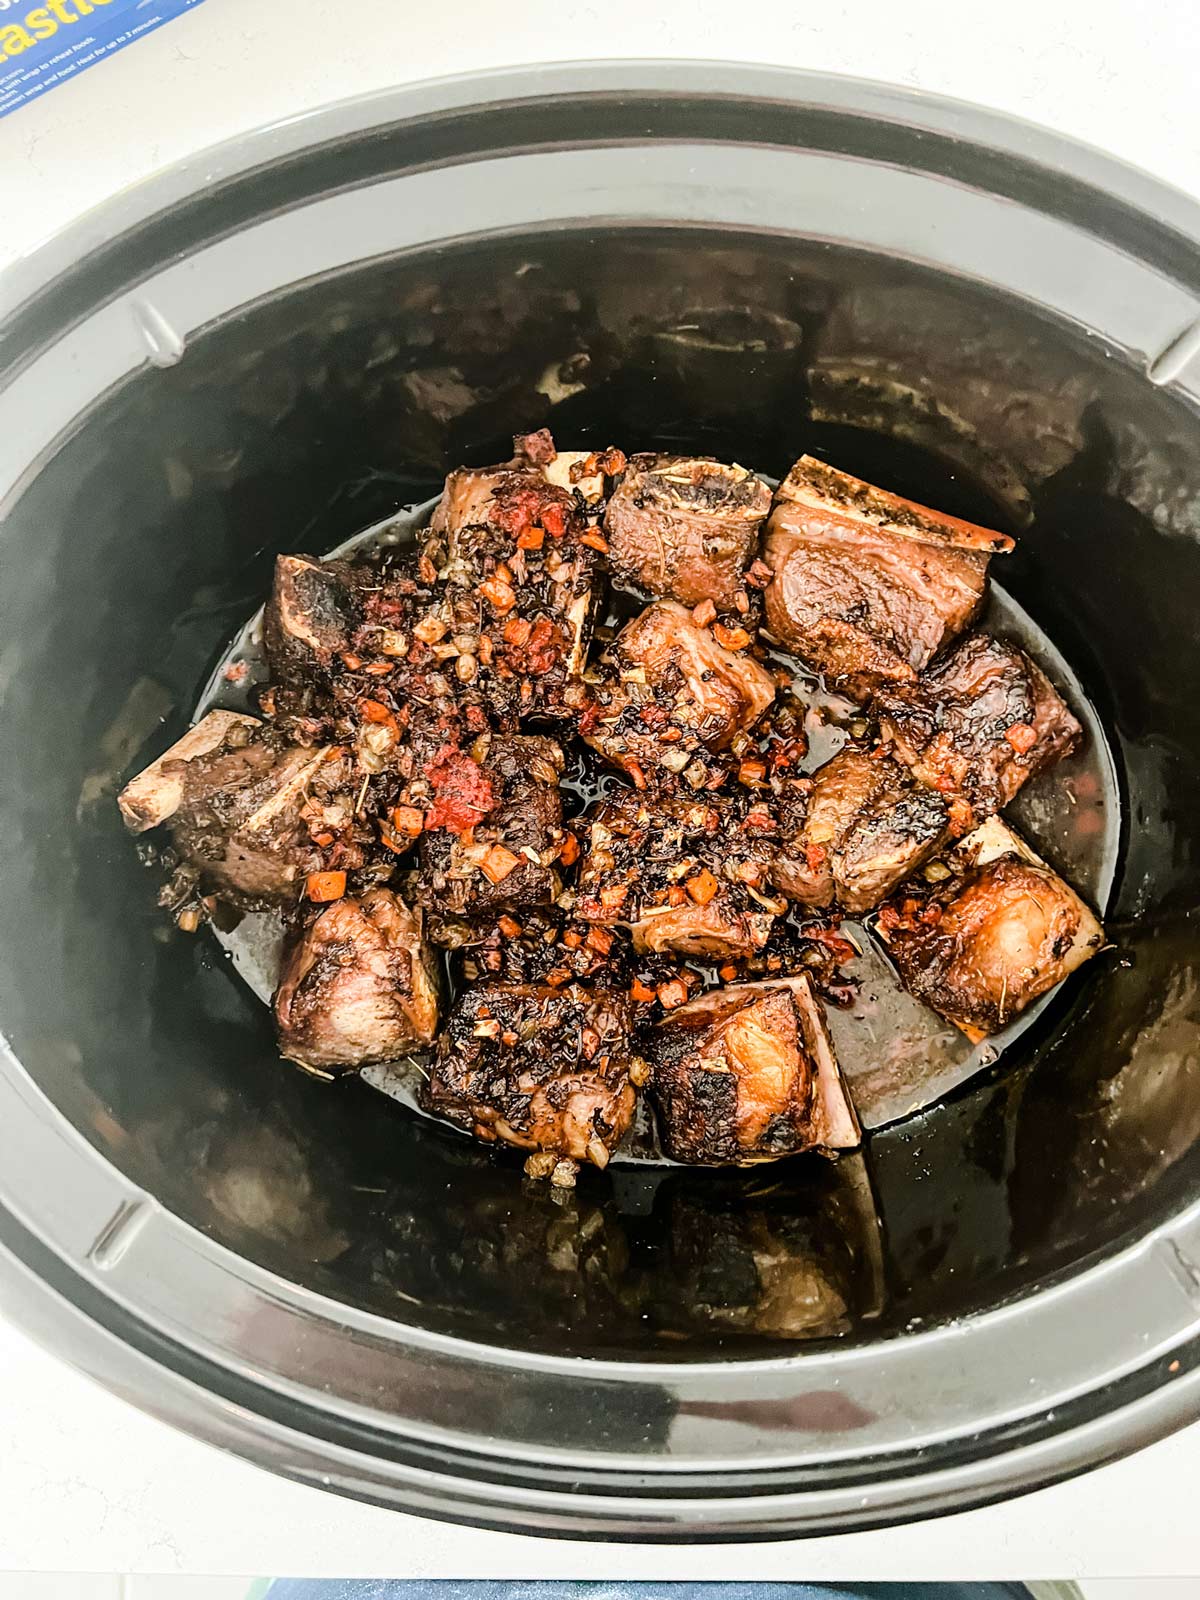 Slow cooker beef ribs ready to cook.